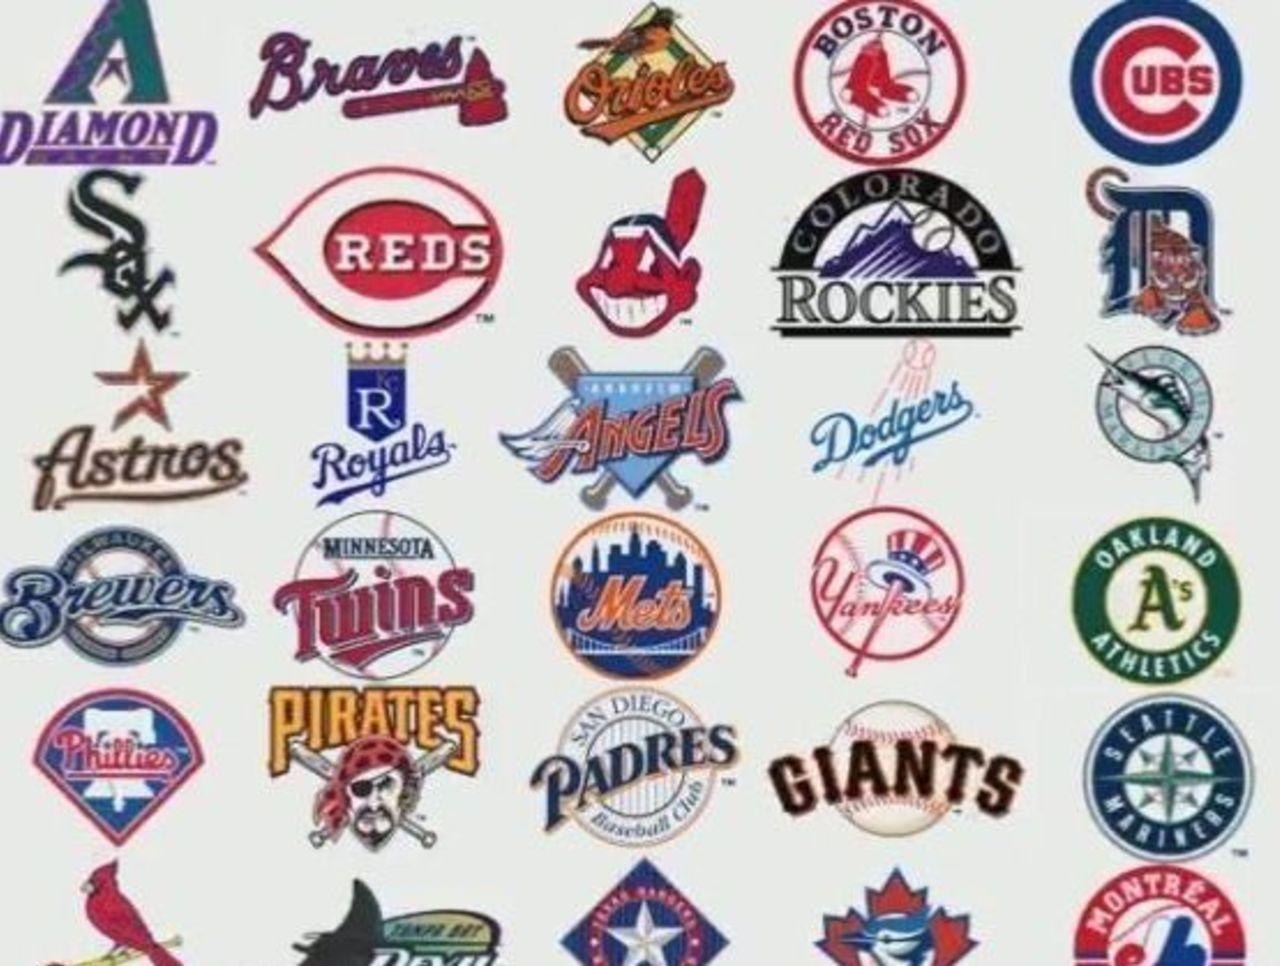 All MLB Logo - Watch: Time Lapse GIF Shows History Of MLB Logos. TheScore.com